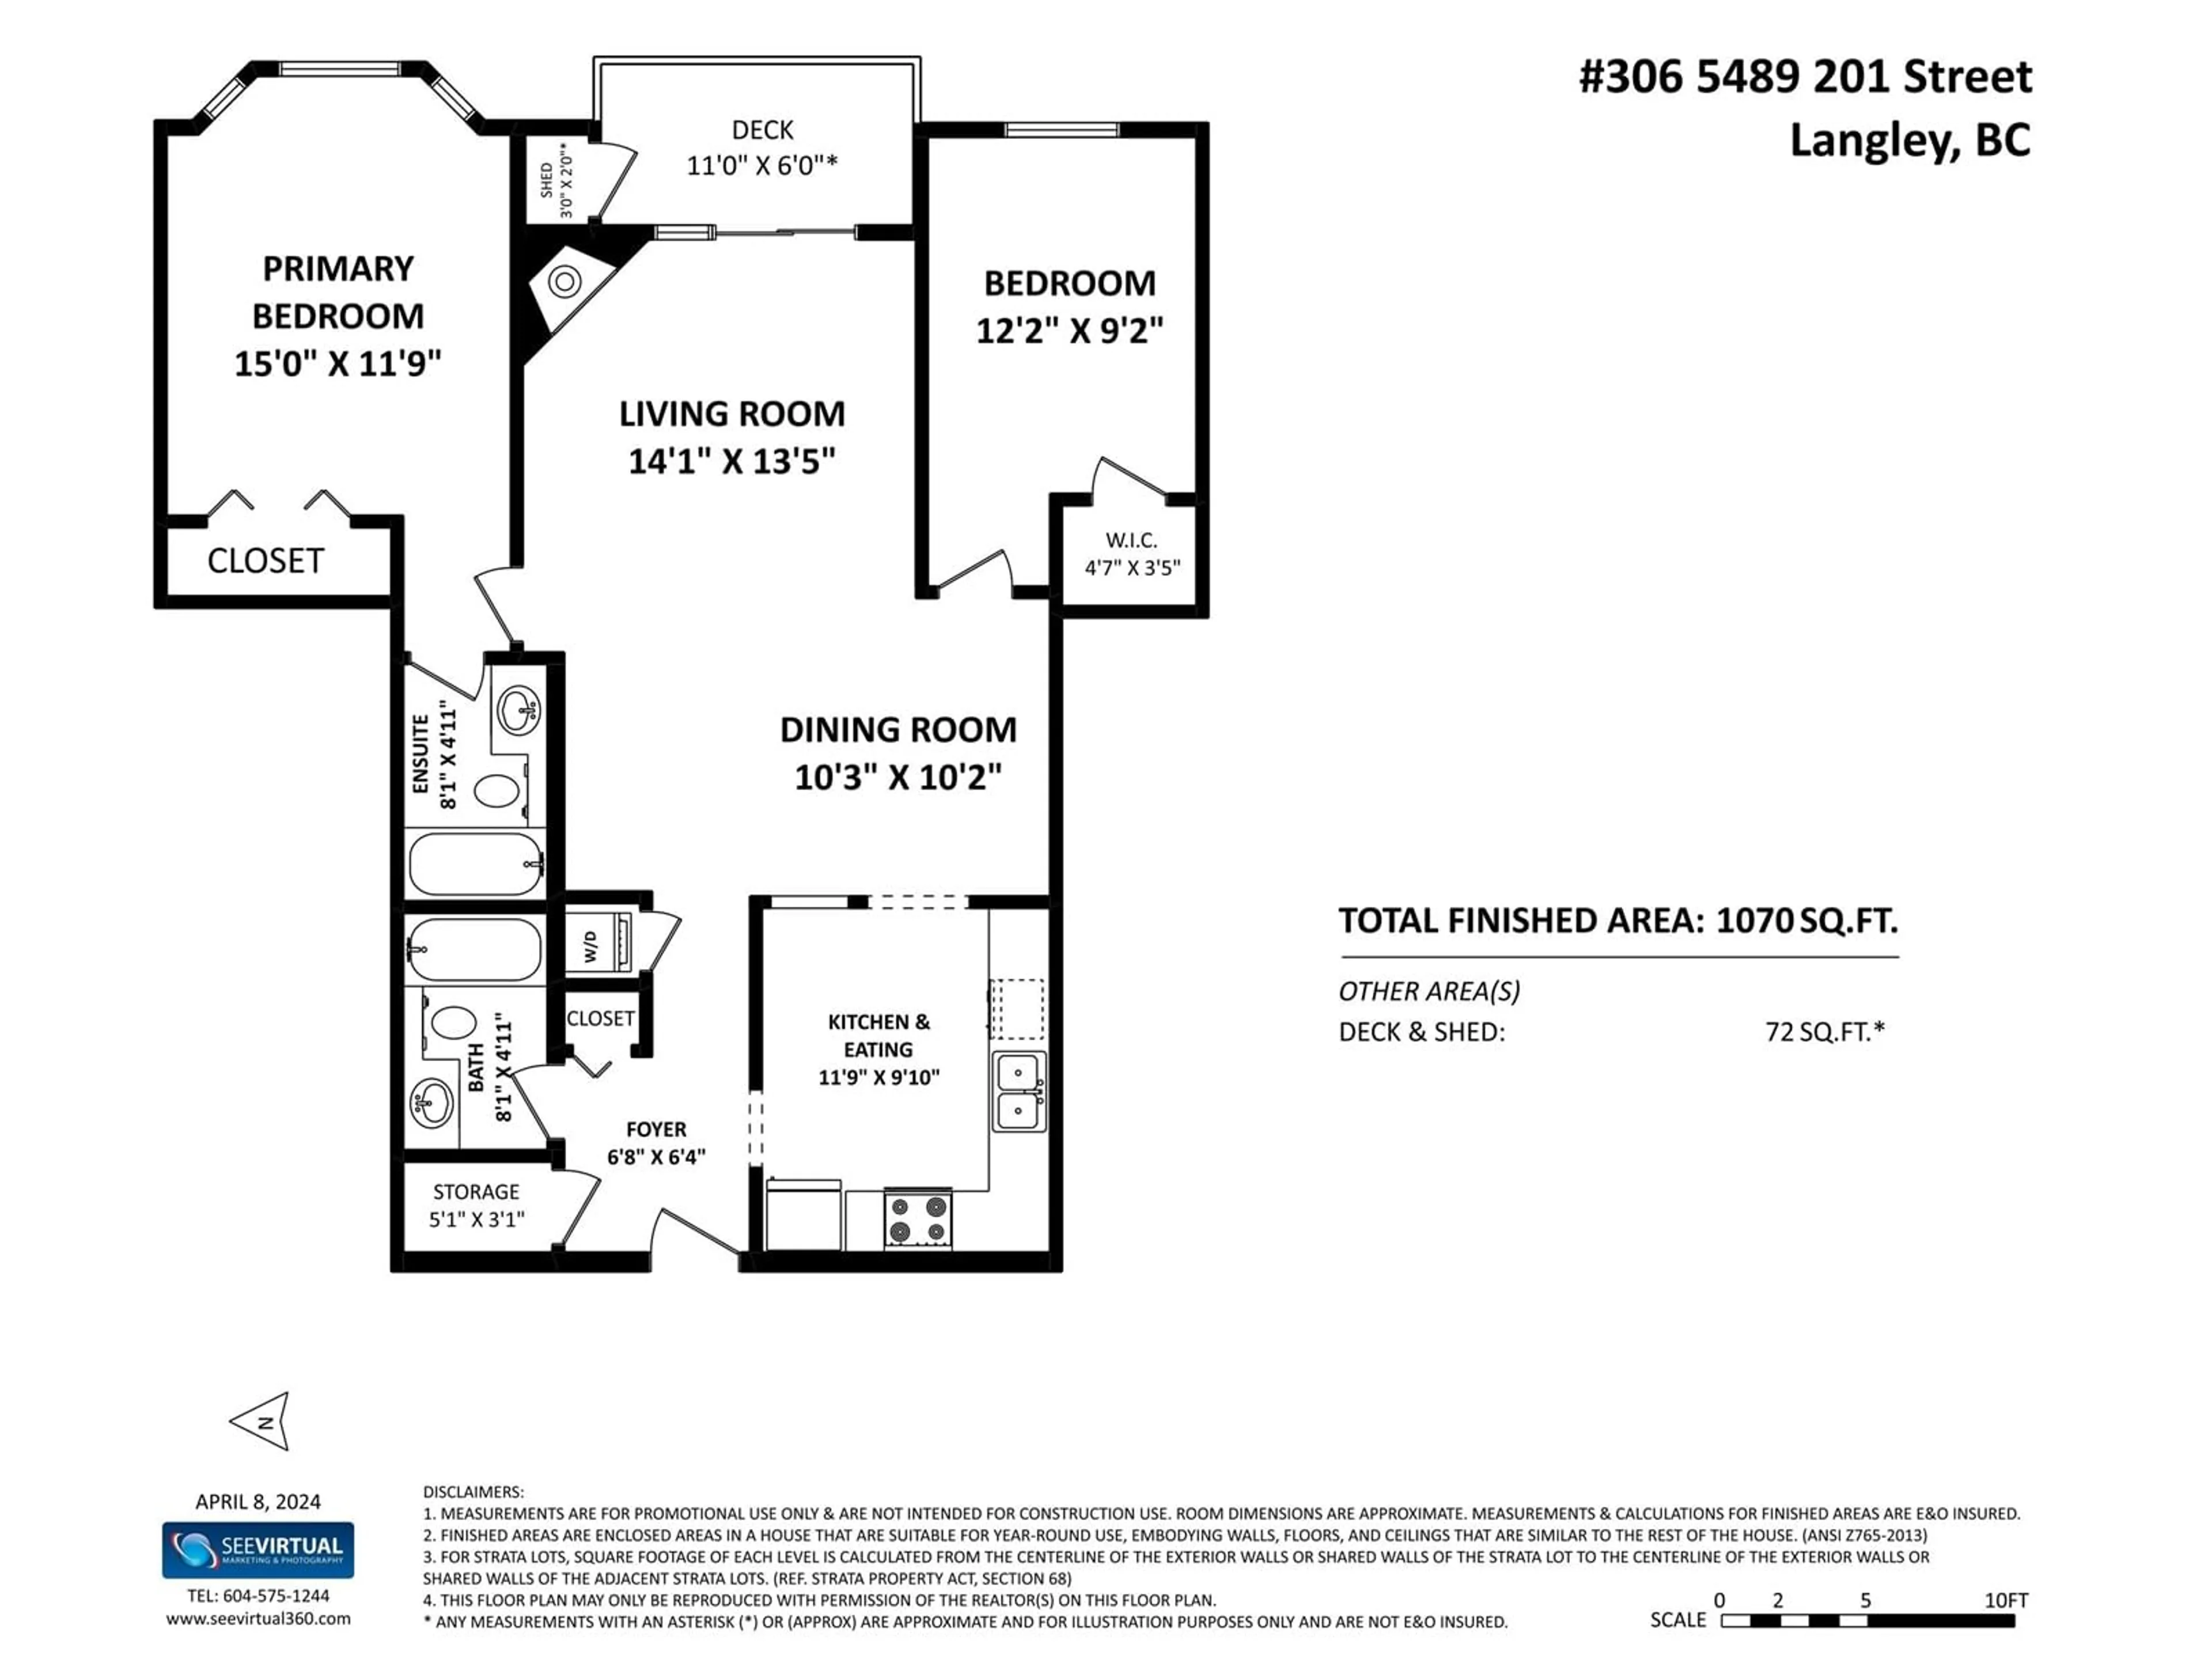 Floor plan for 306 5489 201 STREET, Langley British Columbia V3A1P8